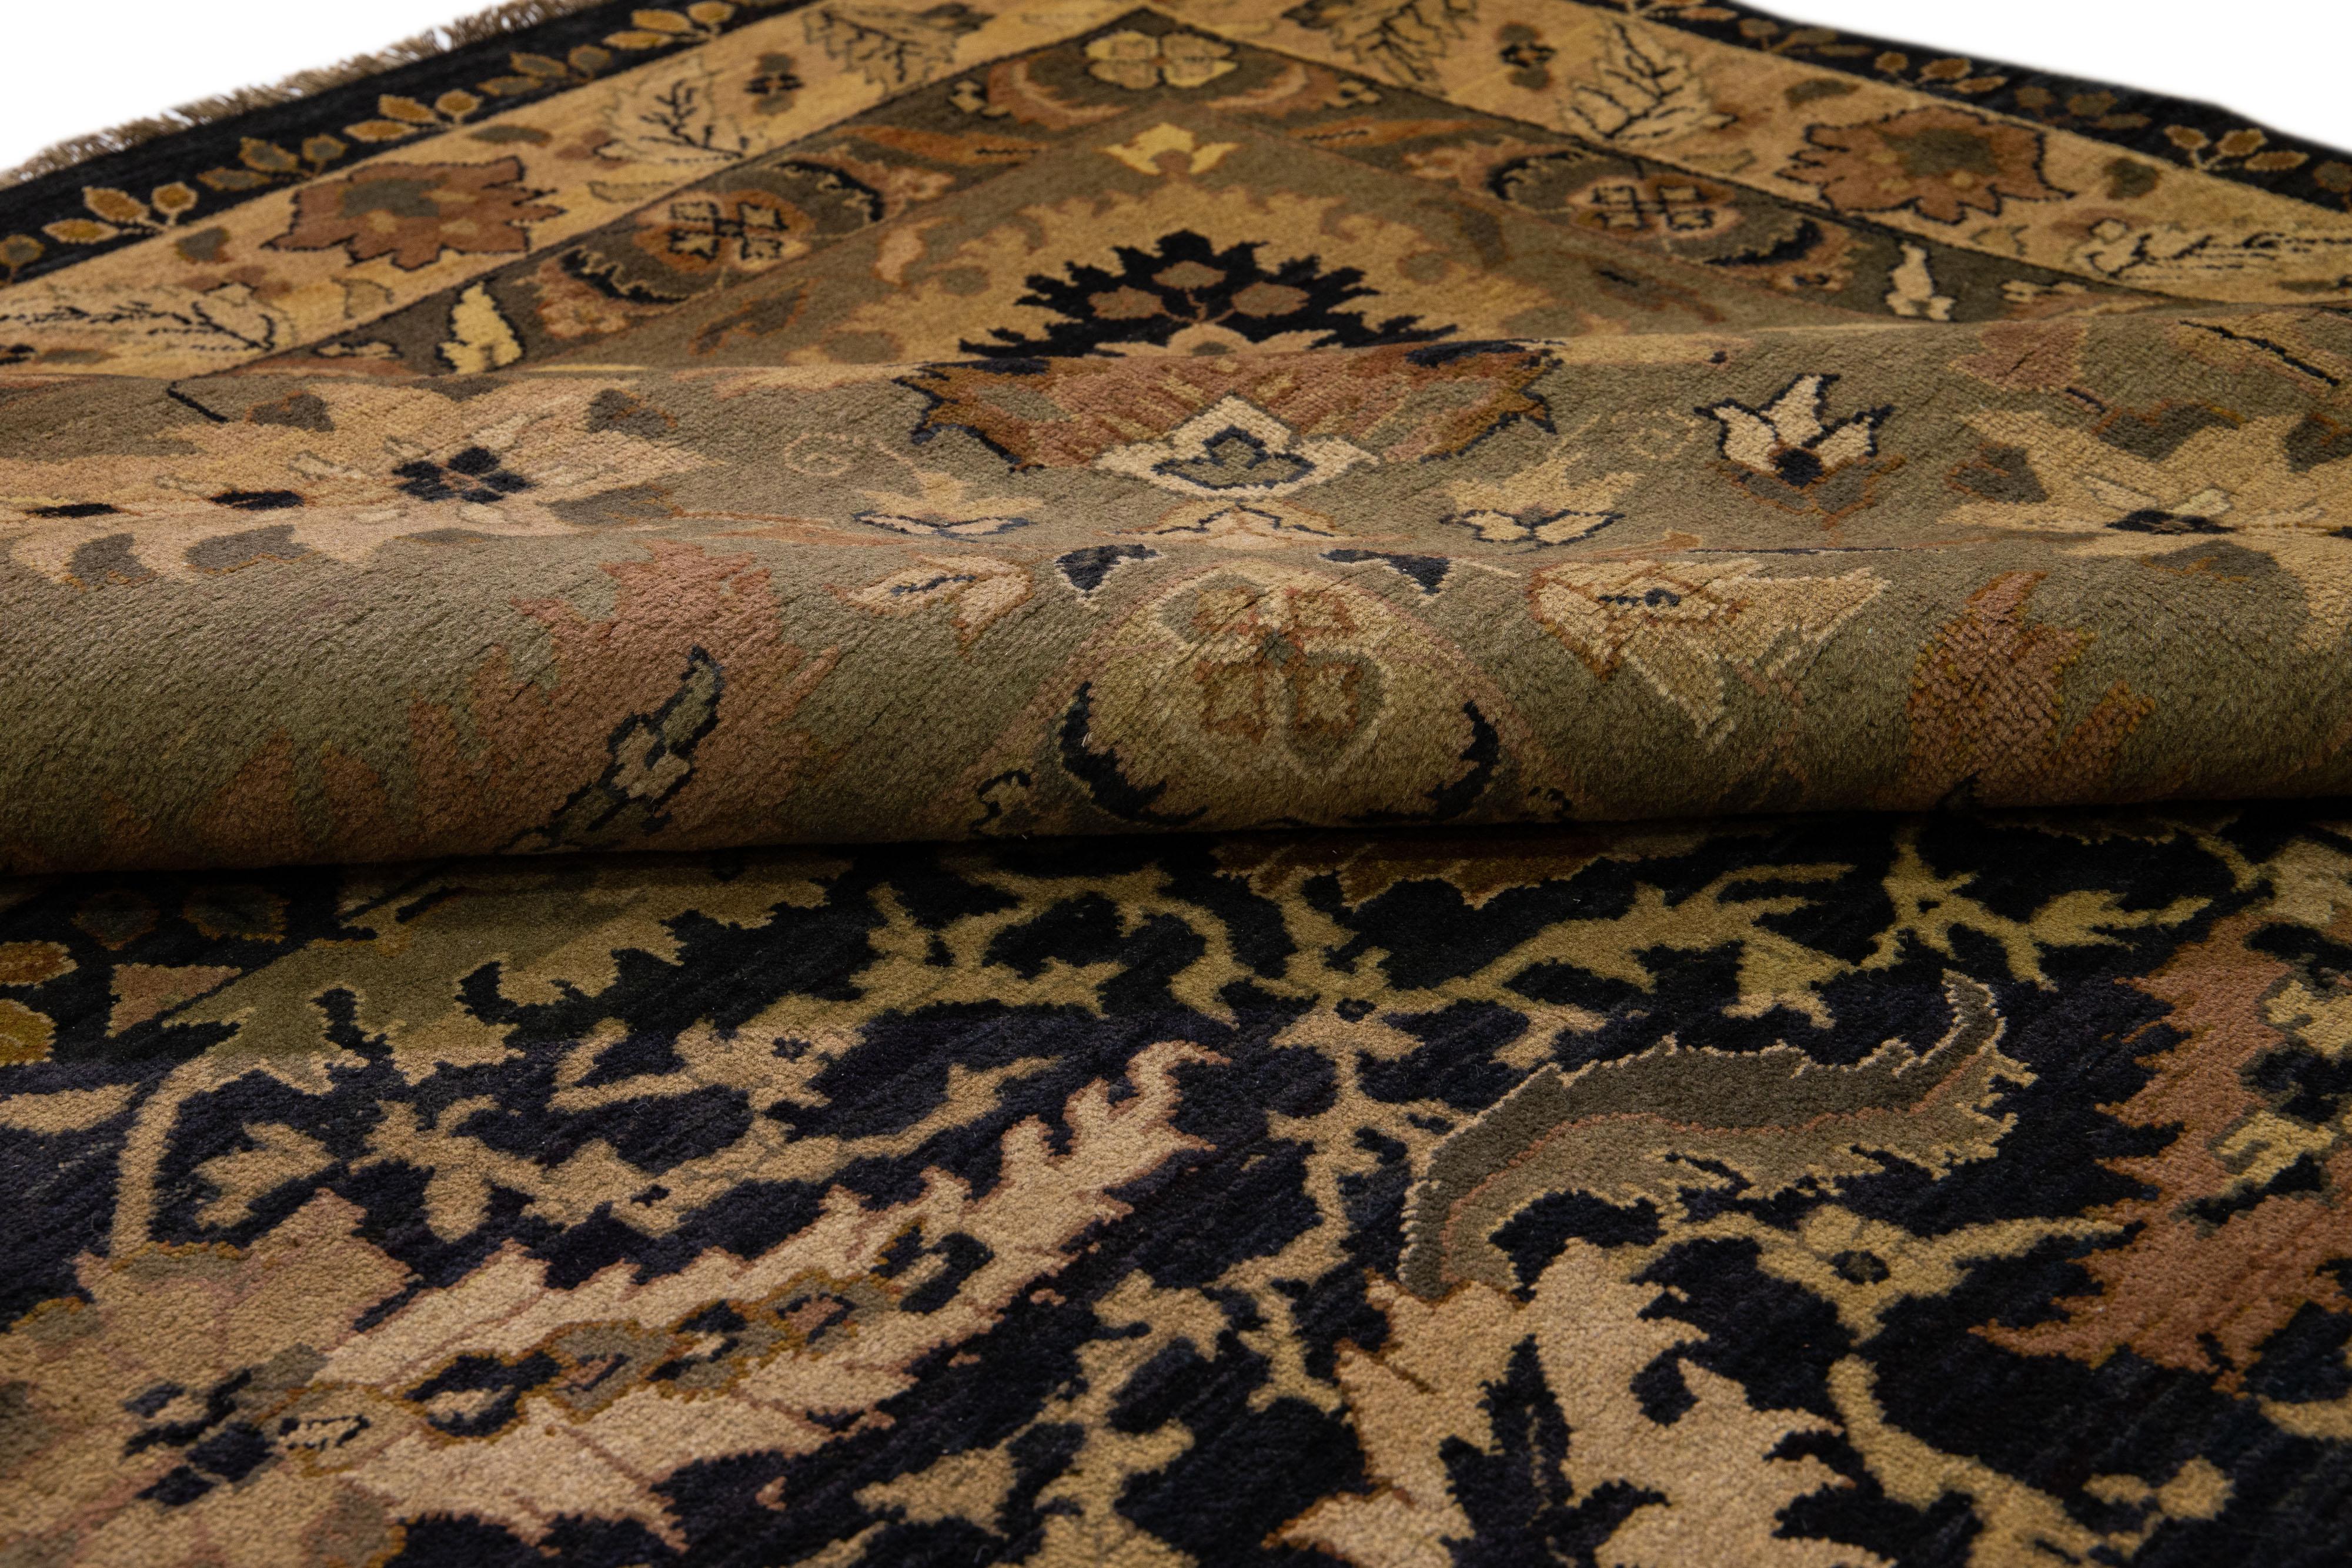 Beautiful Modern Indian Sultanabad Style hand-knotted wool rug with a black field. This piece has a green olive color-designed frame with rust and beige accents in a gorgeous all-over floral pattern design.

This rug measures: 20' x 23'7